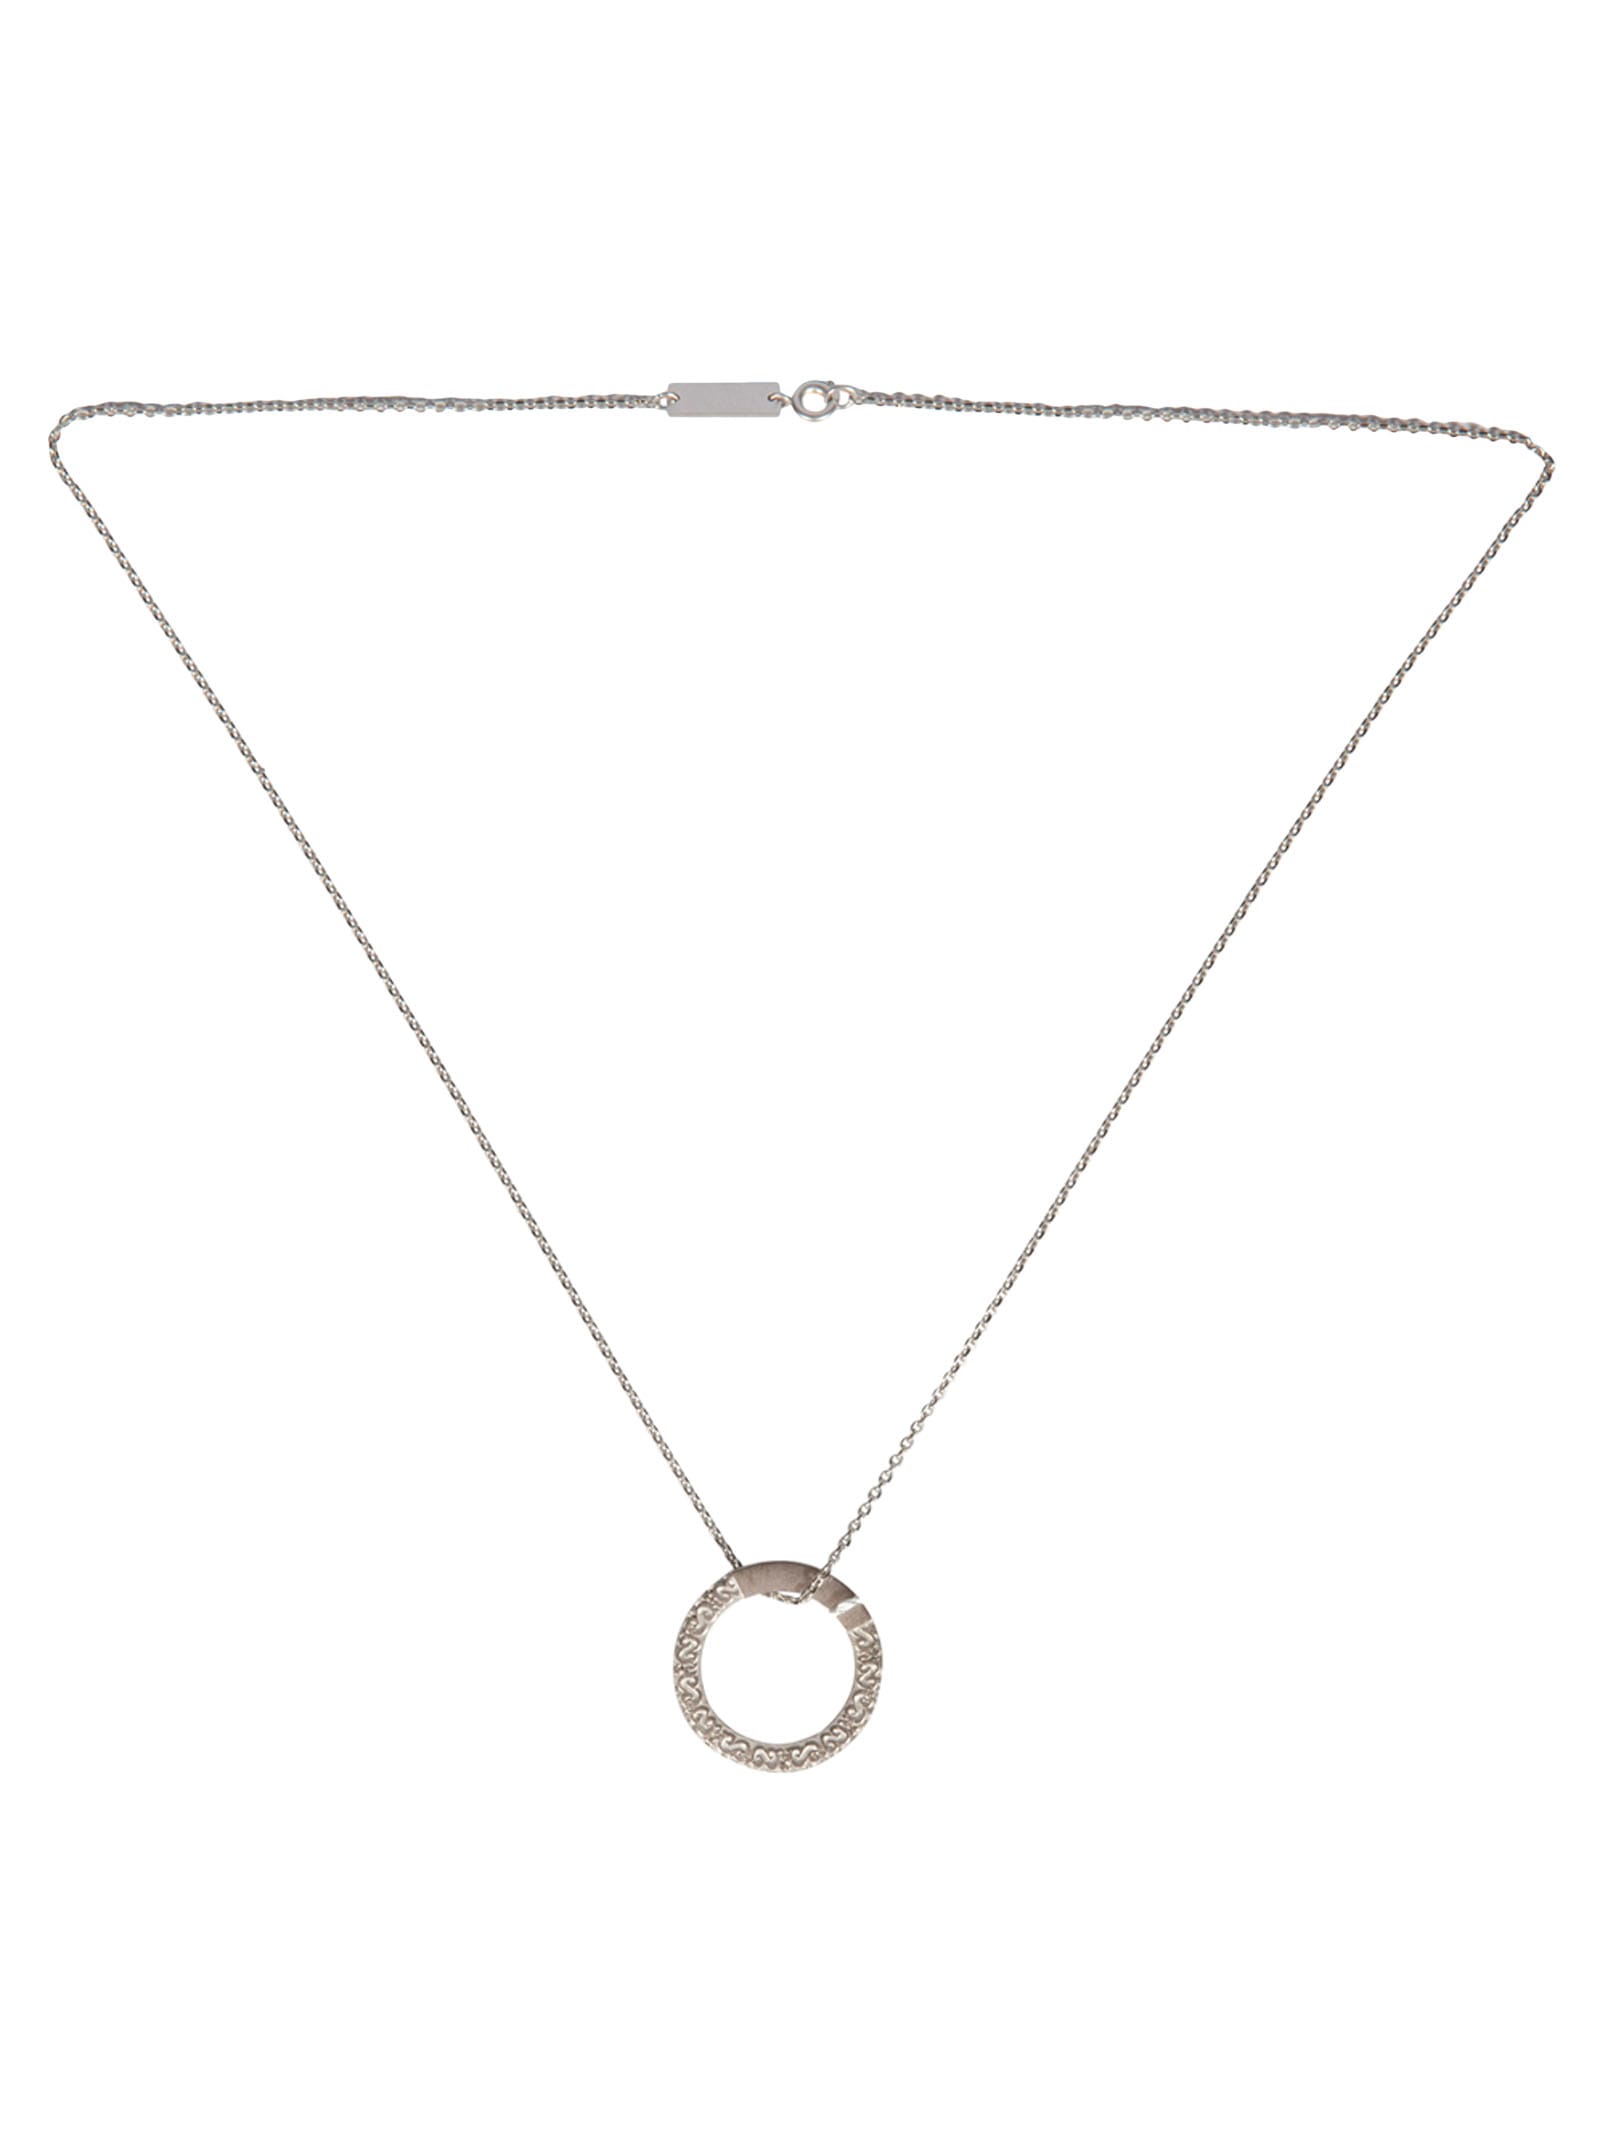 Maison Margiela Engraved Ring Detail Chain Necklace